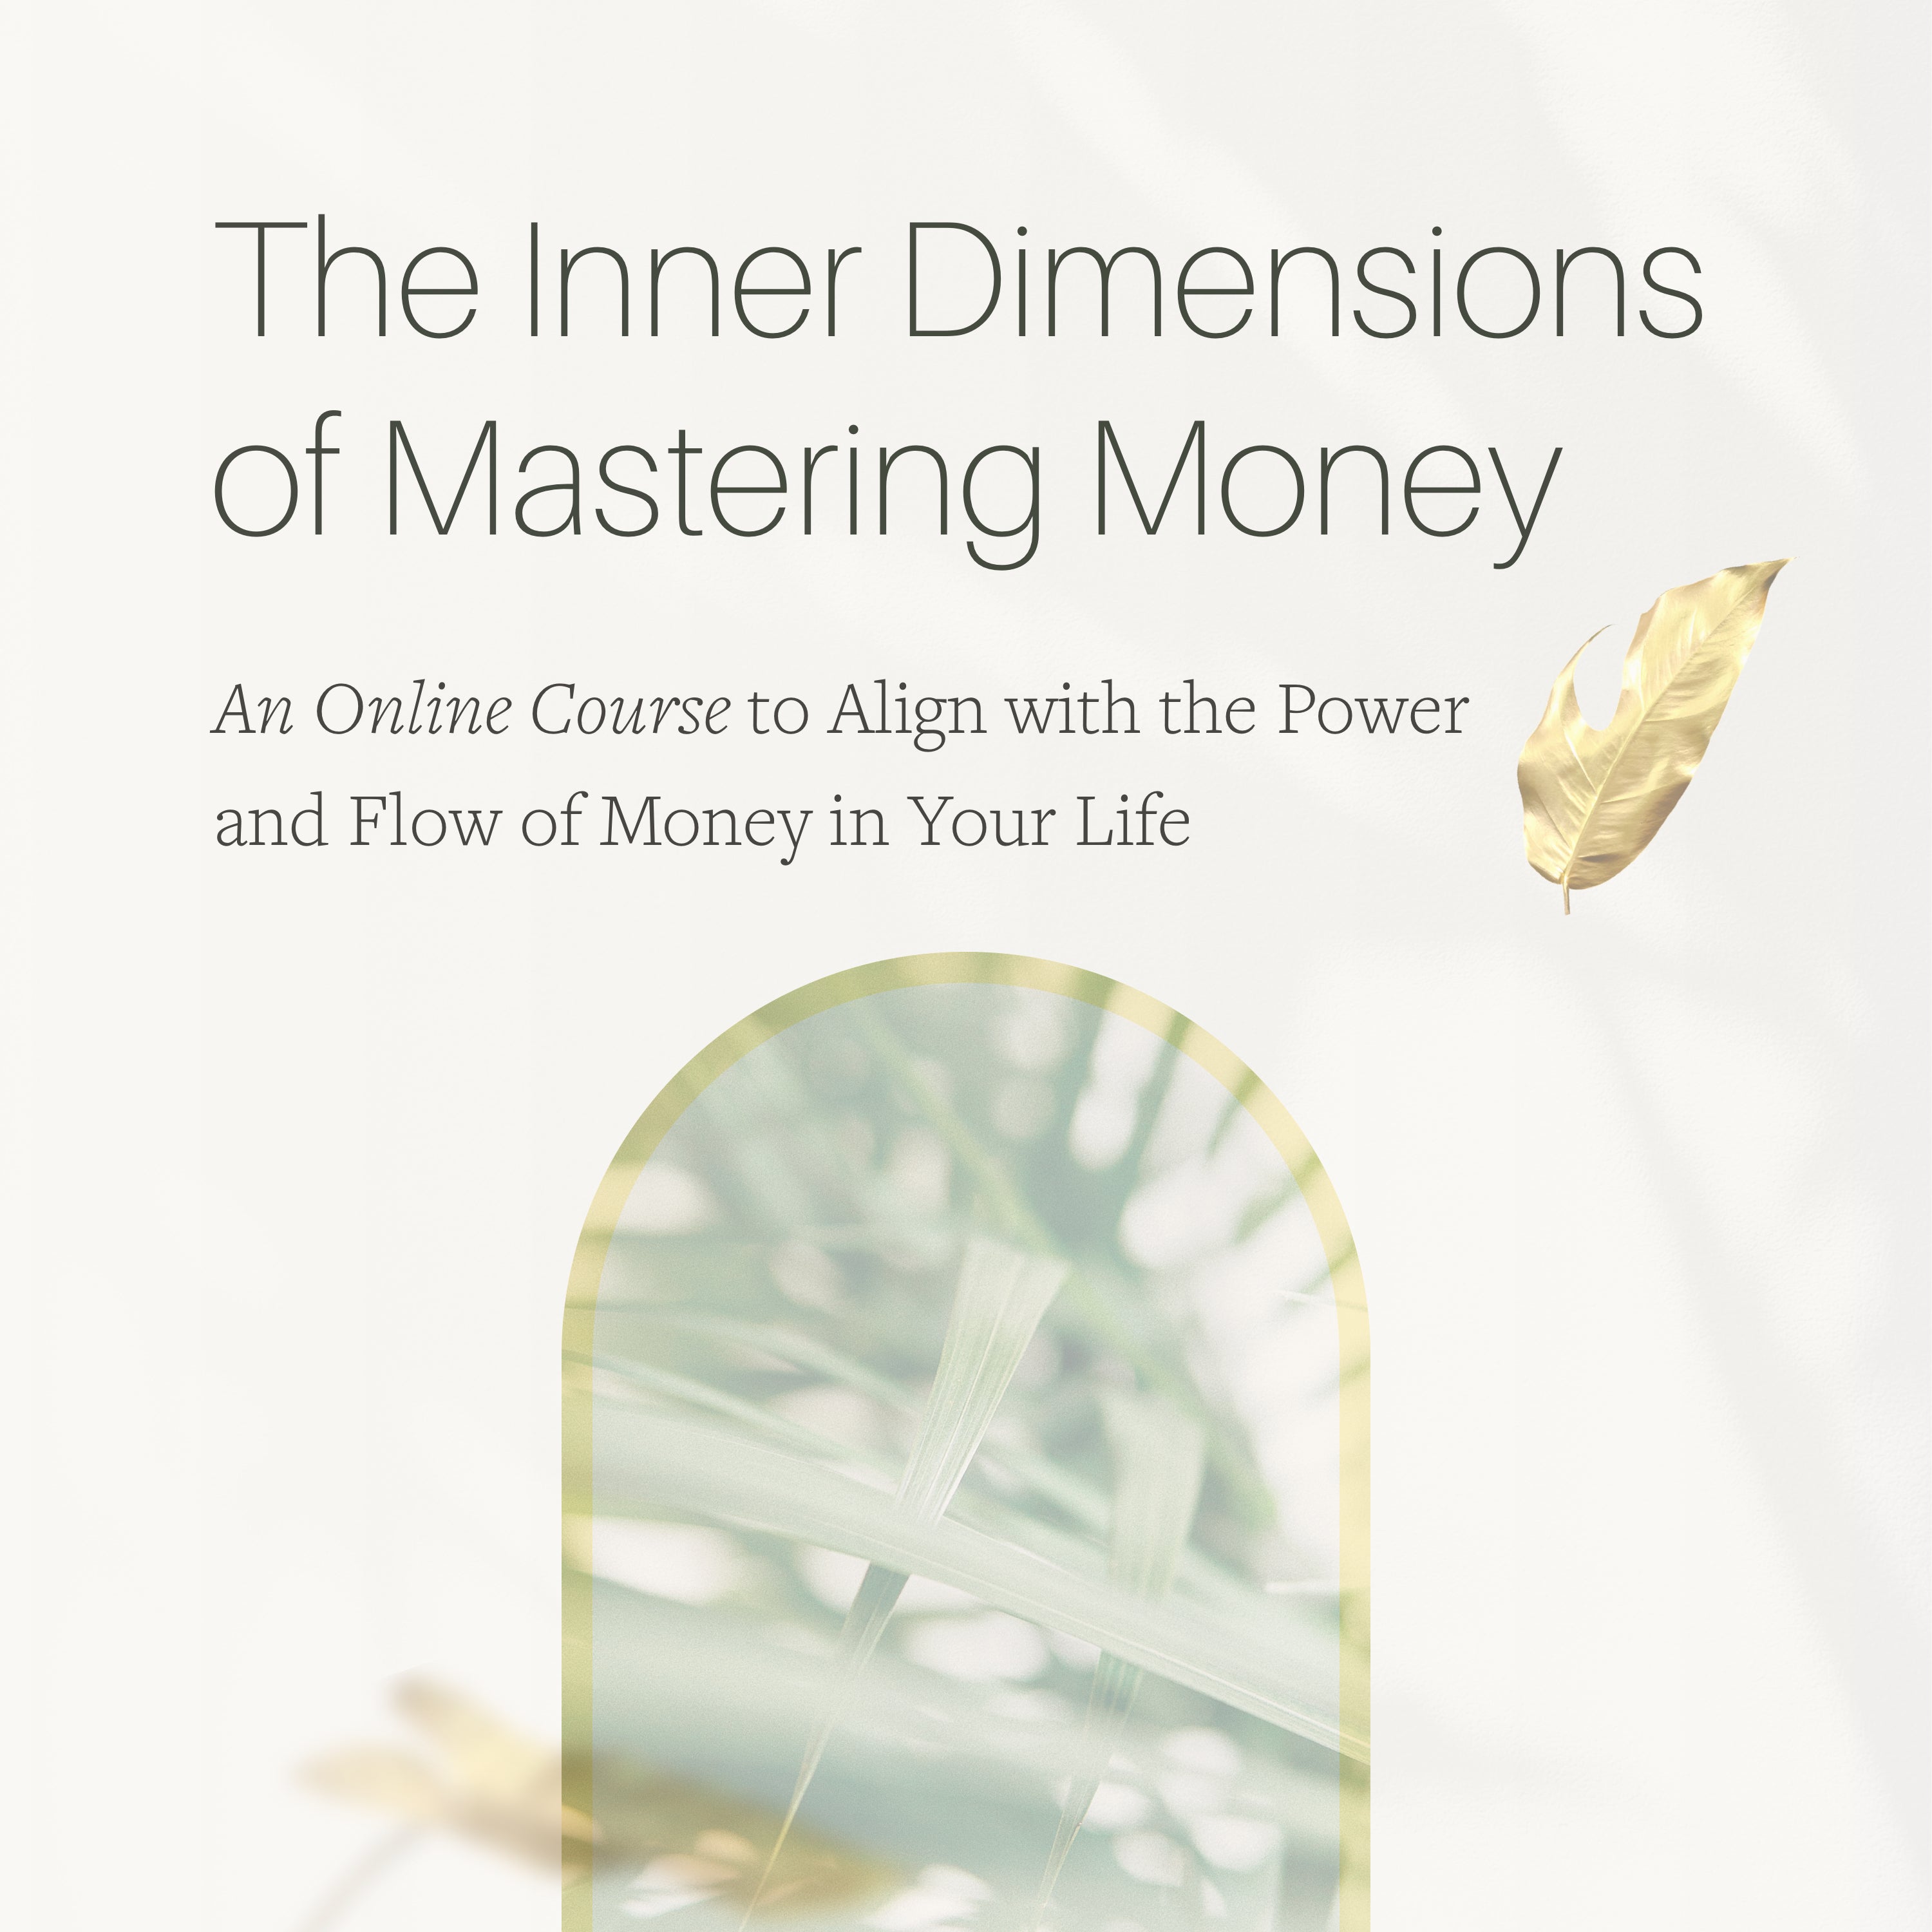 The Inner Dimensions of Mastering Money